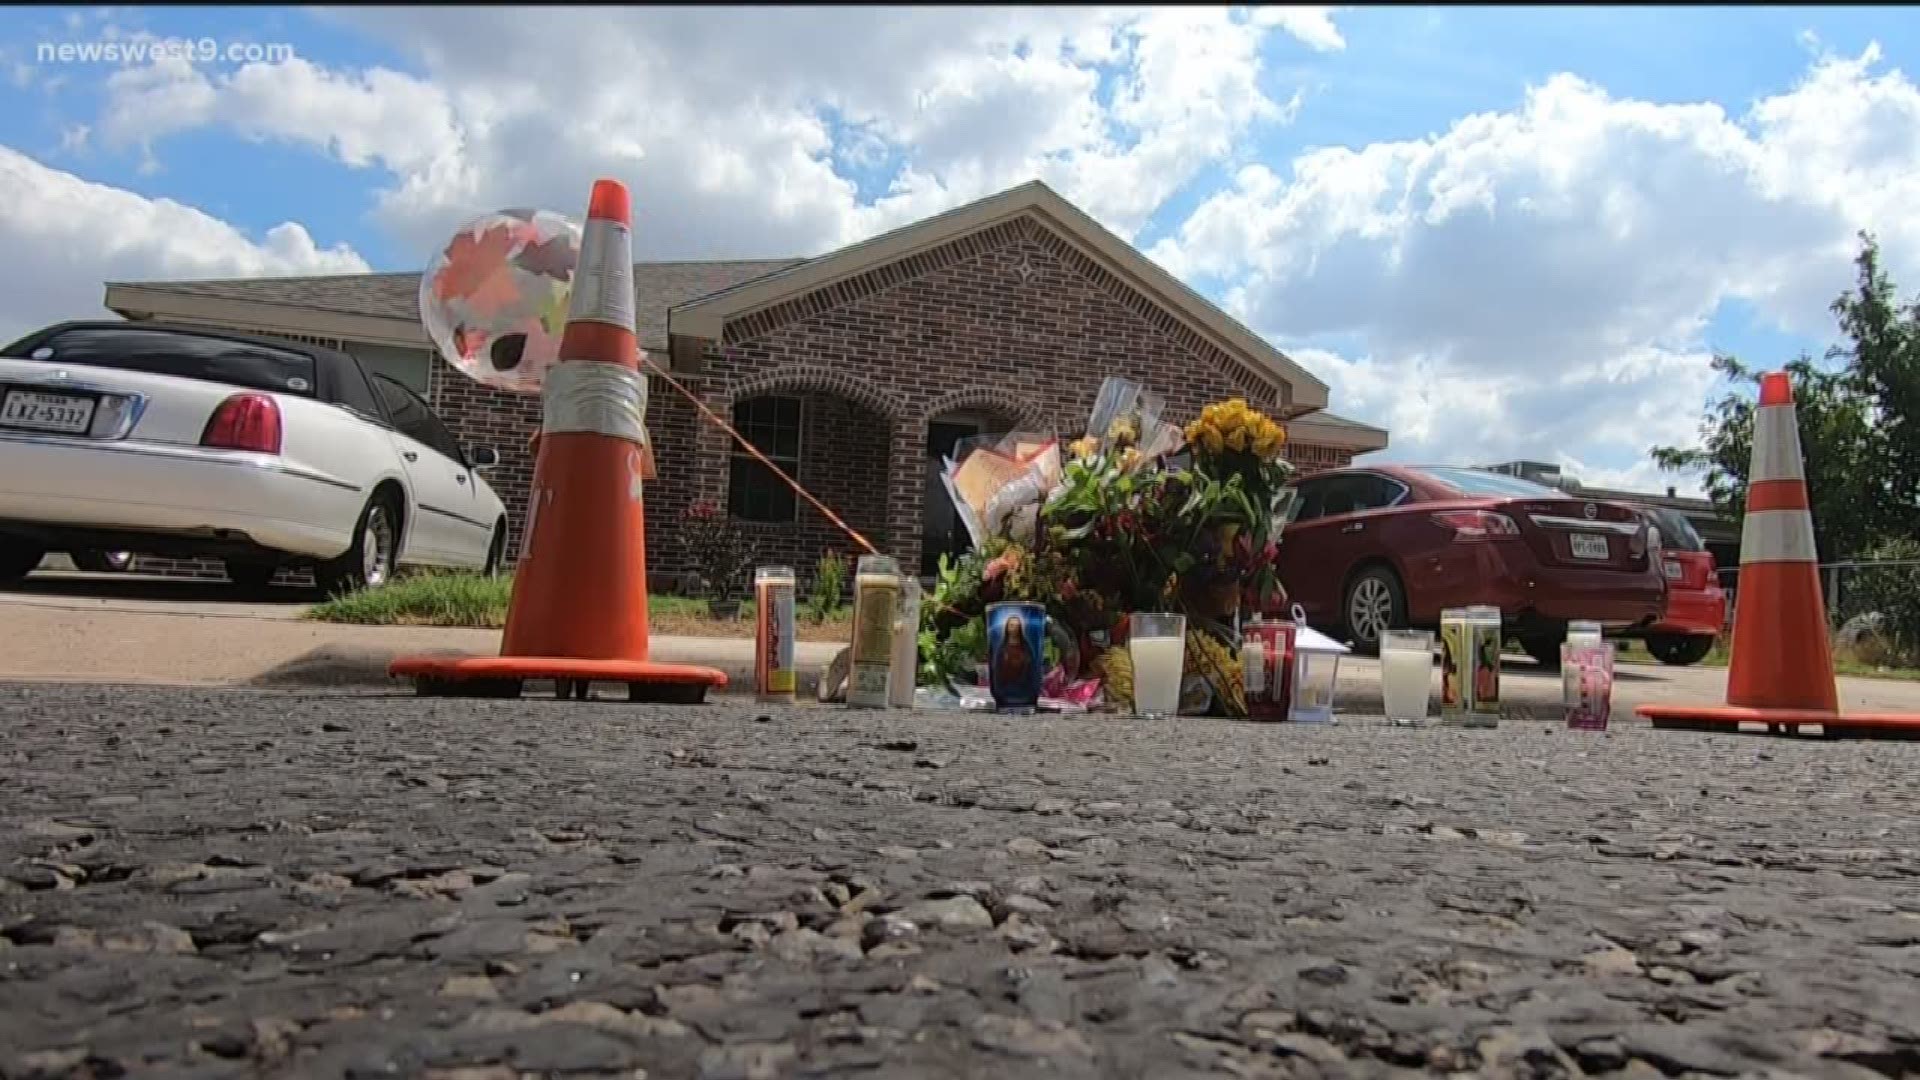 A temporary memorial for postal worker Mary Granados has been set up where she was shot on Adams Avenue in Odessa.